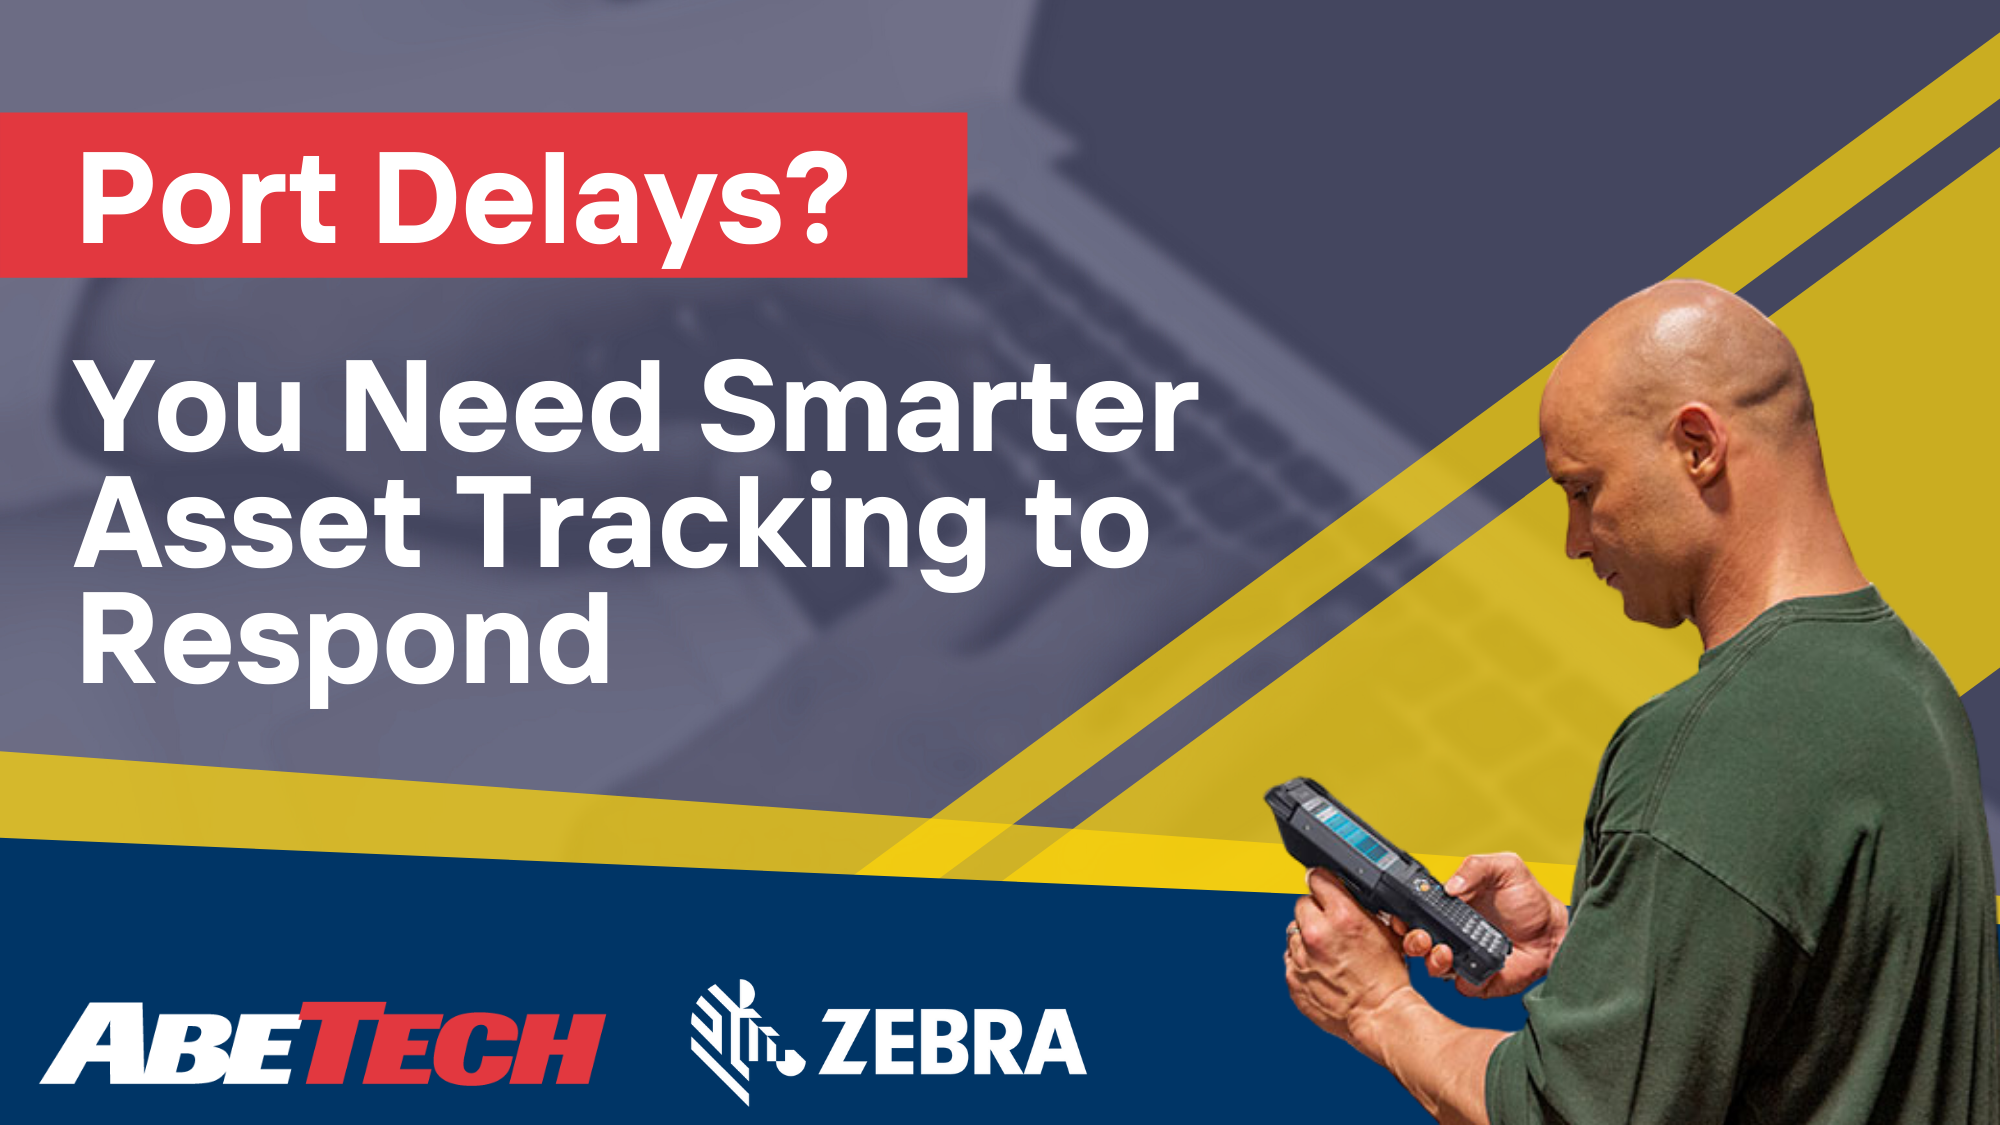 Utilizing Tracking to Respond to the Port Delays